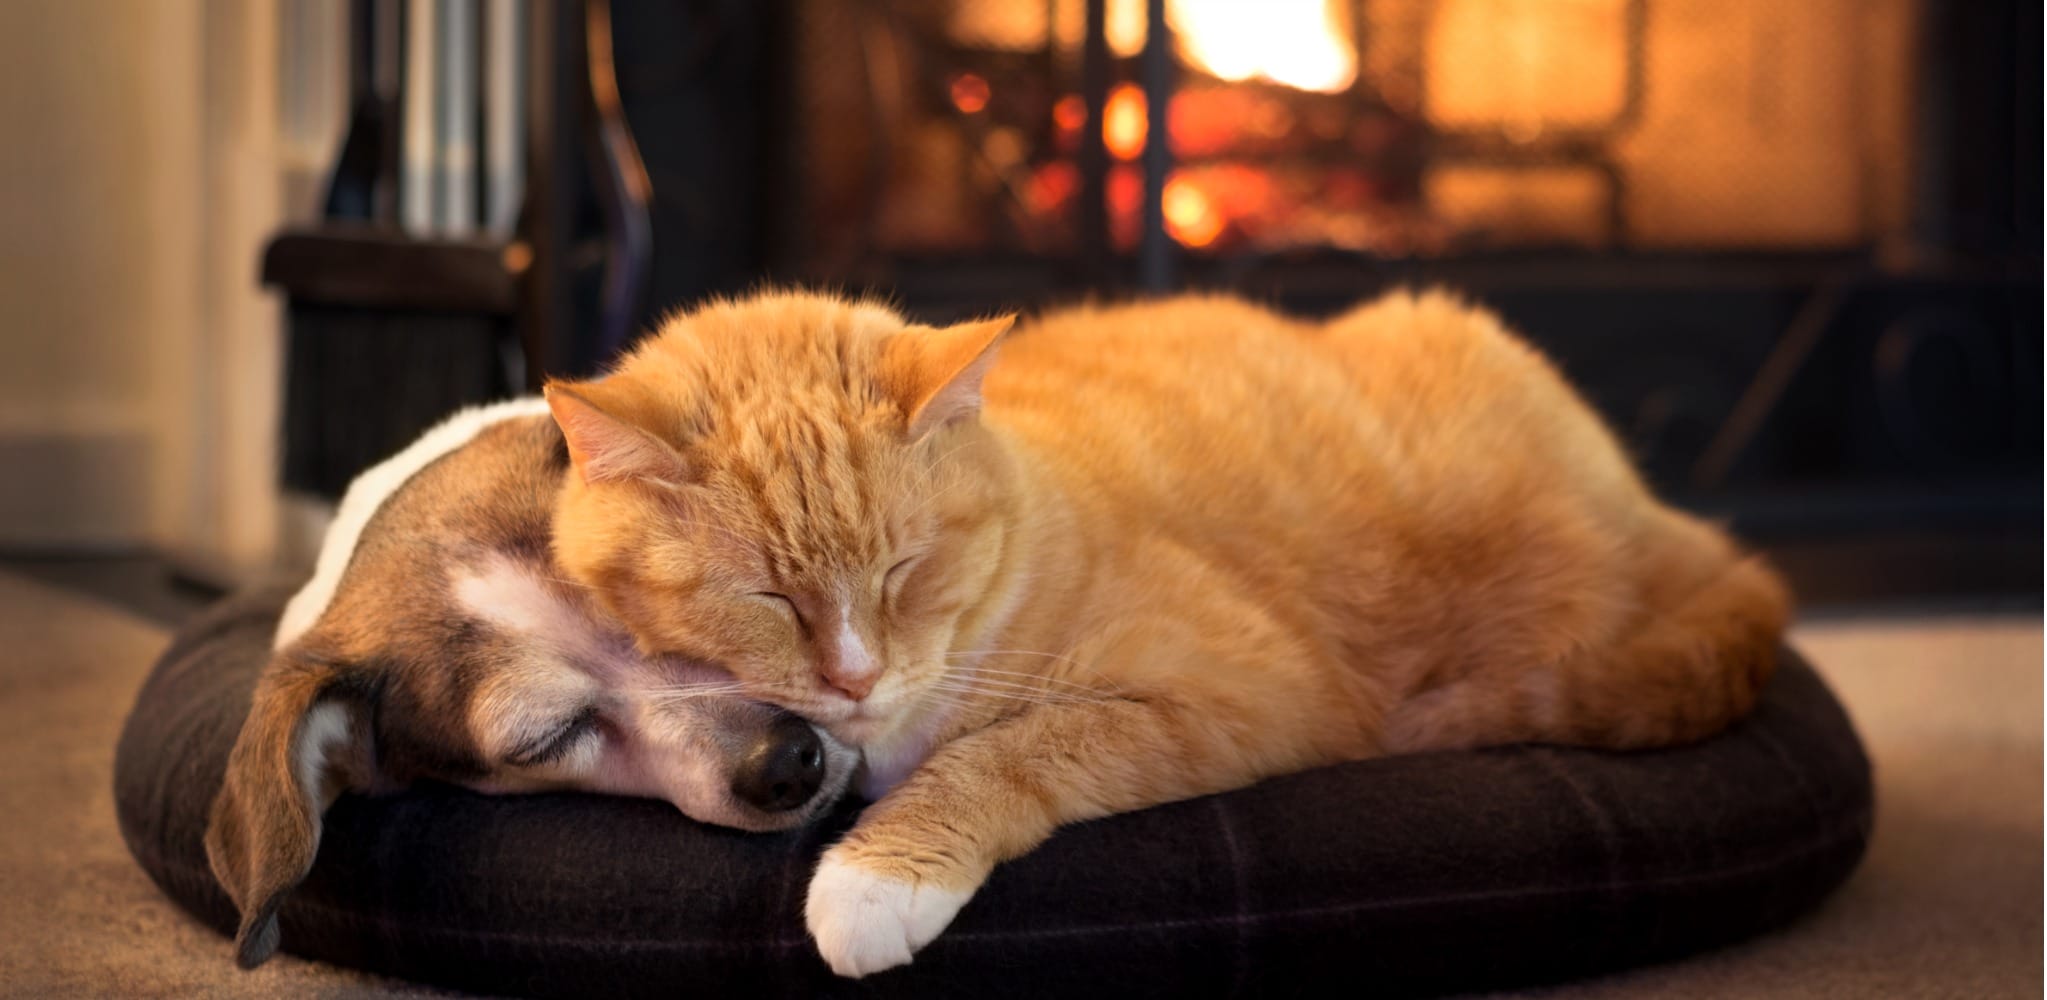 cat and dog snuggling by fireplace